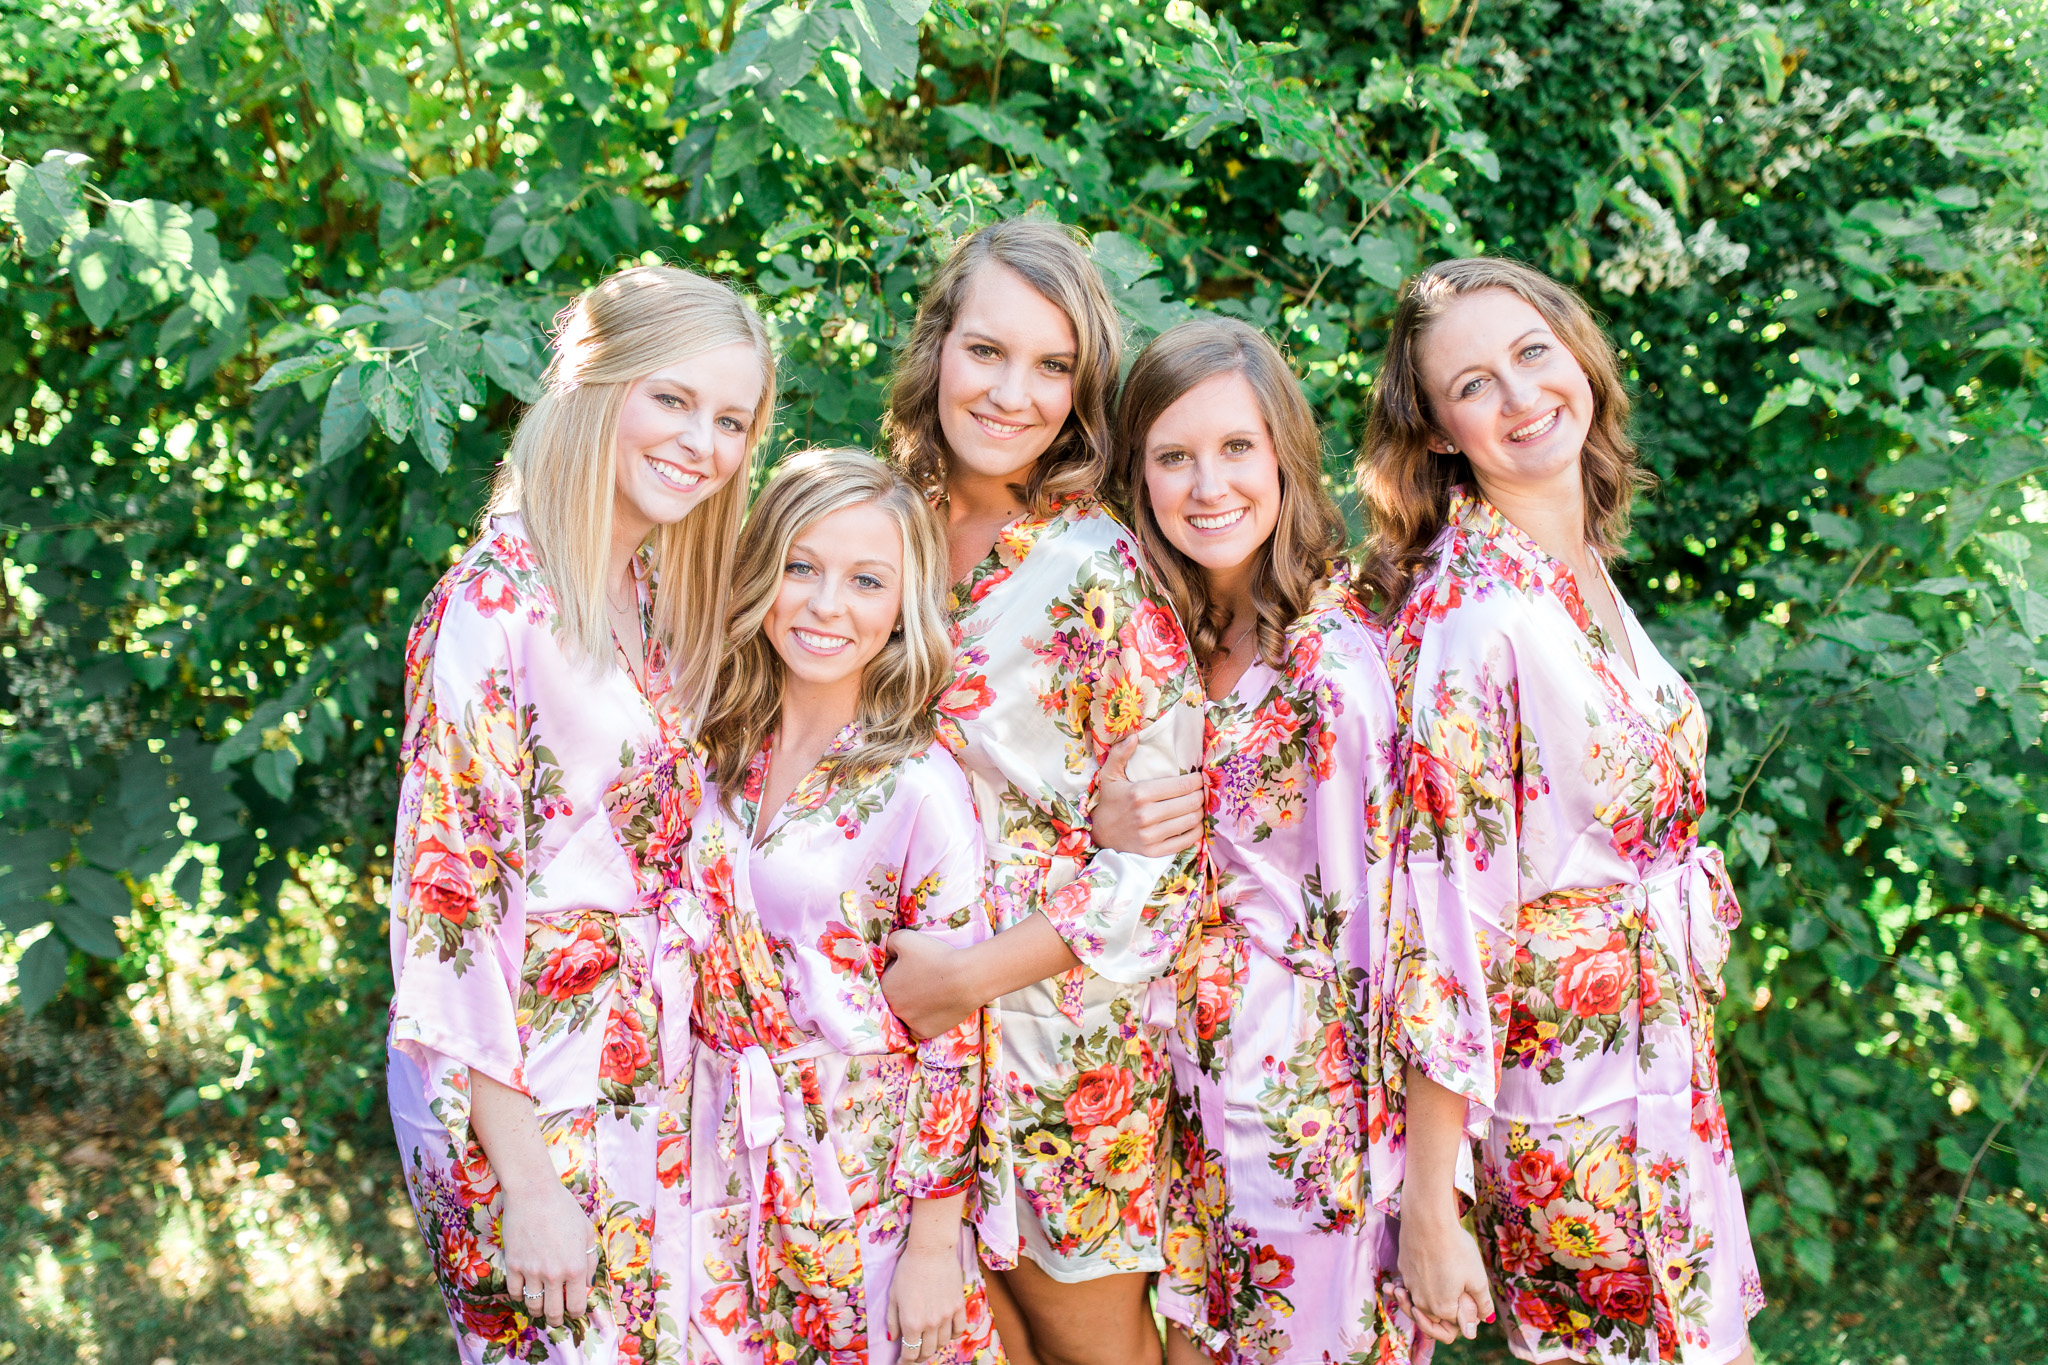 Best friends | Spa Day with Bridal Party | Natural Beauty Products | Floral Robes | Girls Night | Giveaway!